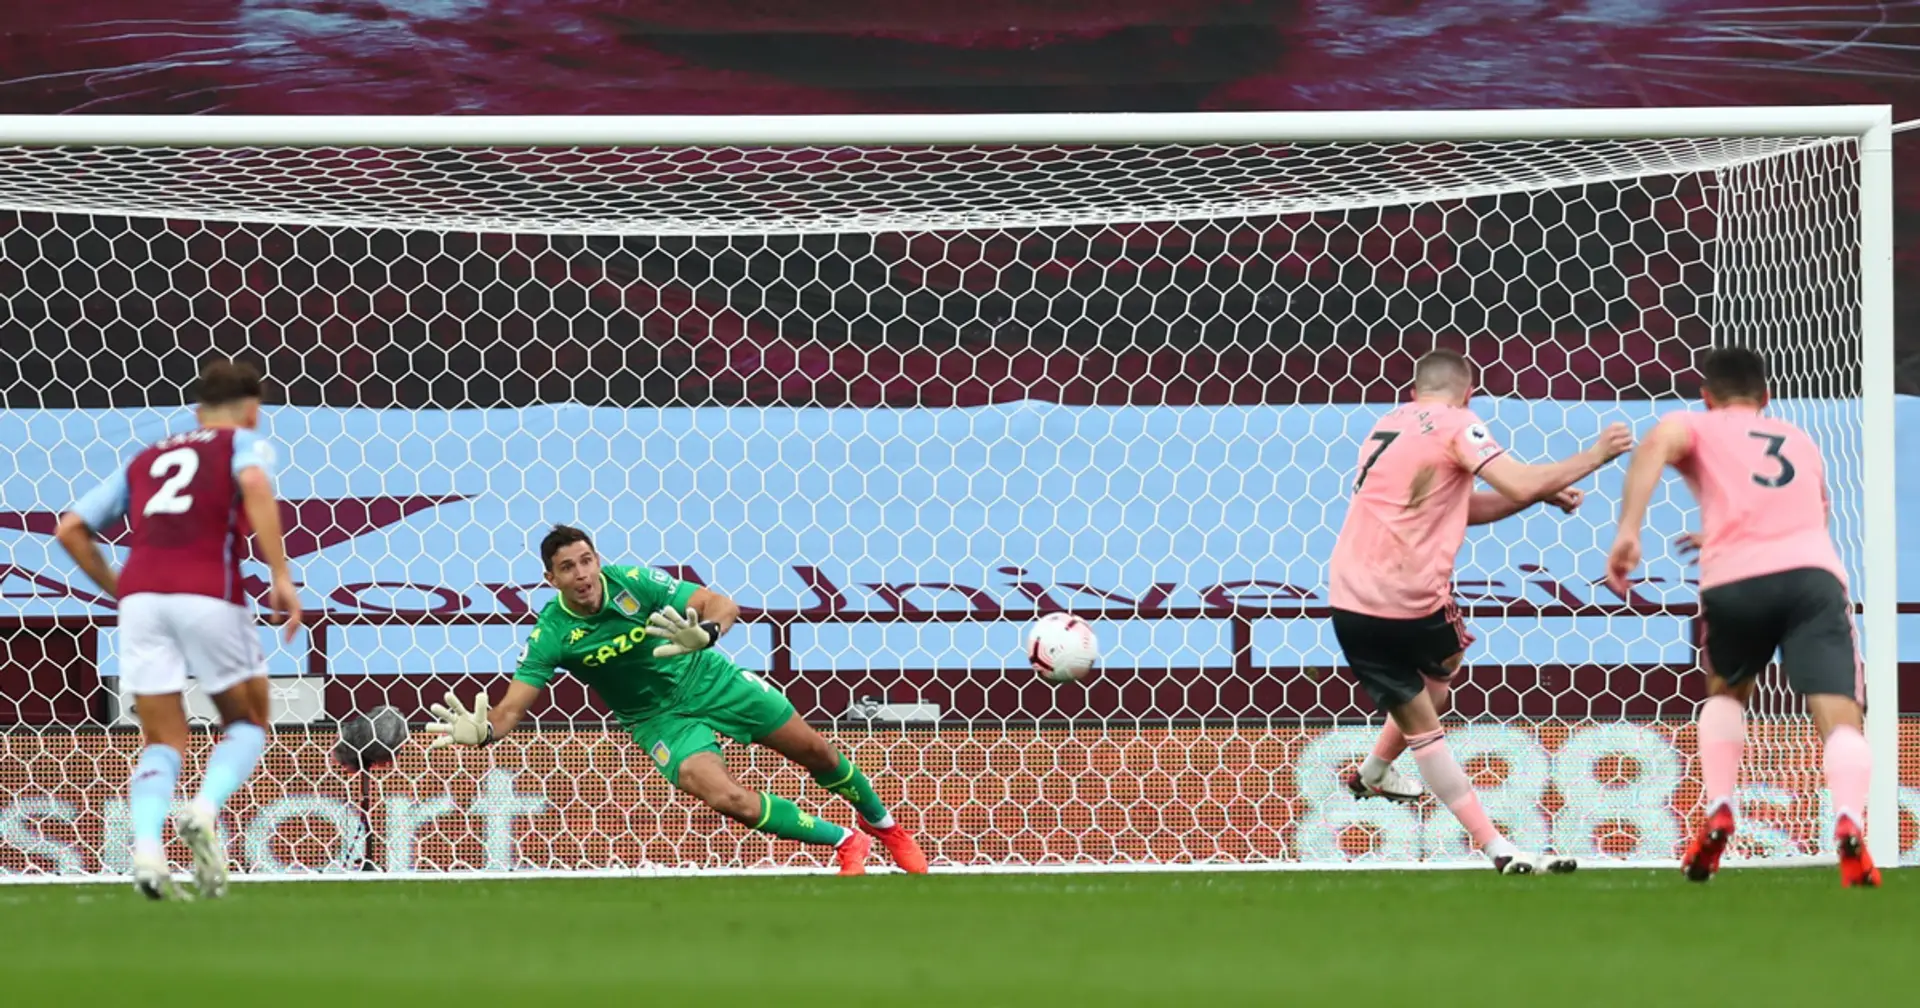 Emi Martinez saves penalty on his Villa debut, Arsenal fans go into overdrive